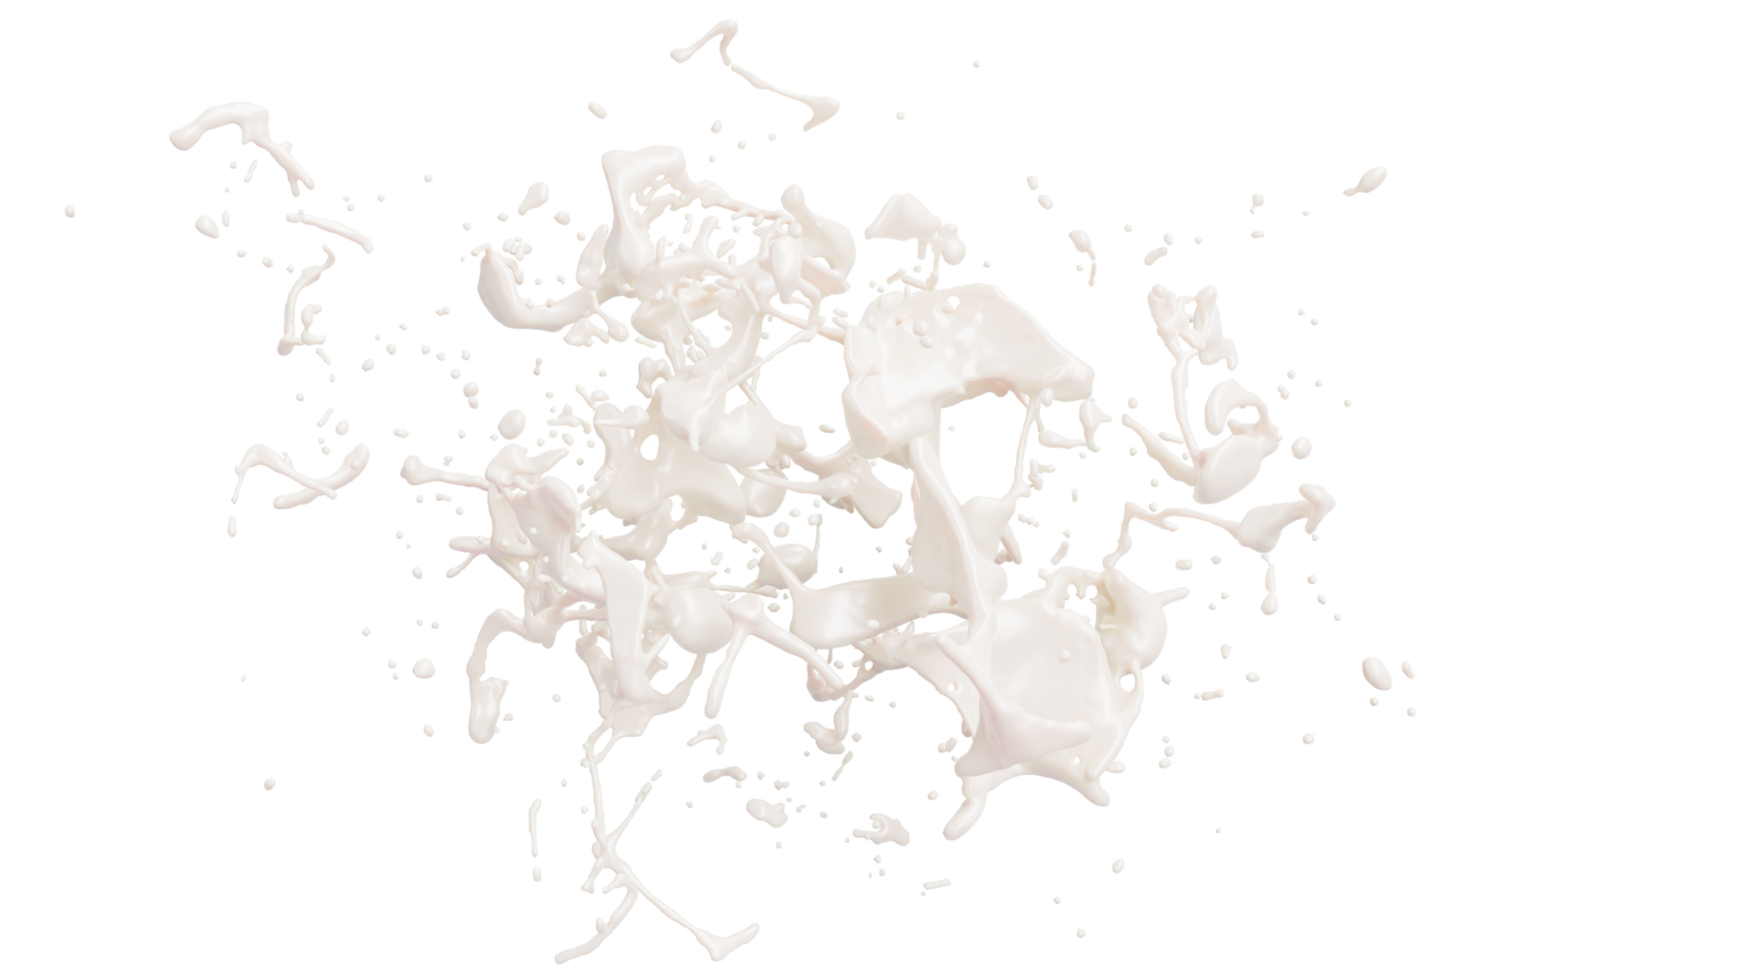 Milk splash with droplets isolated on background. 3d illustration png